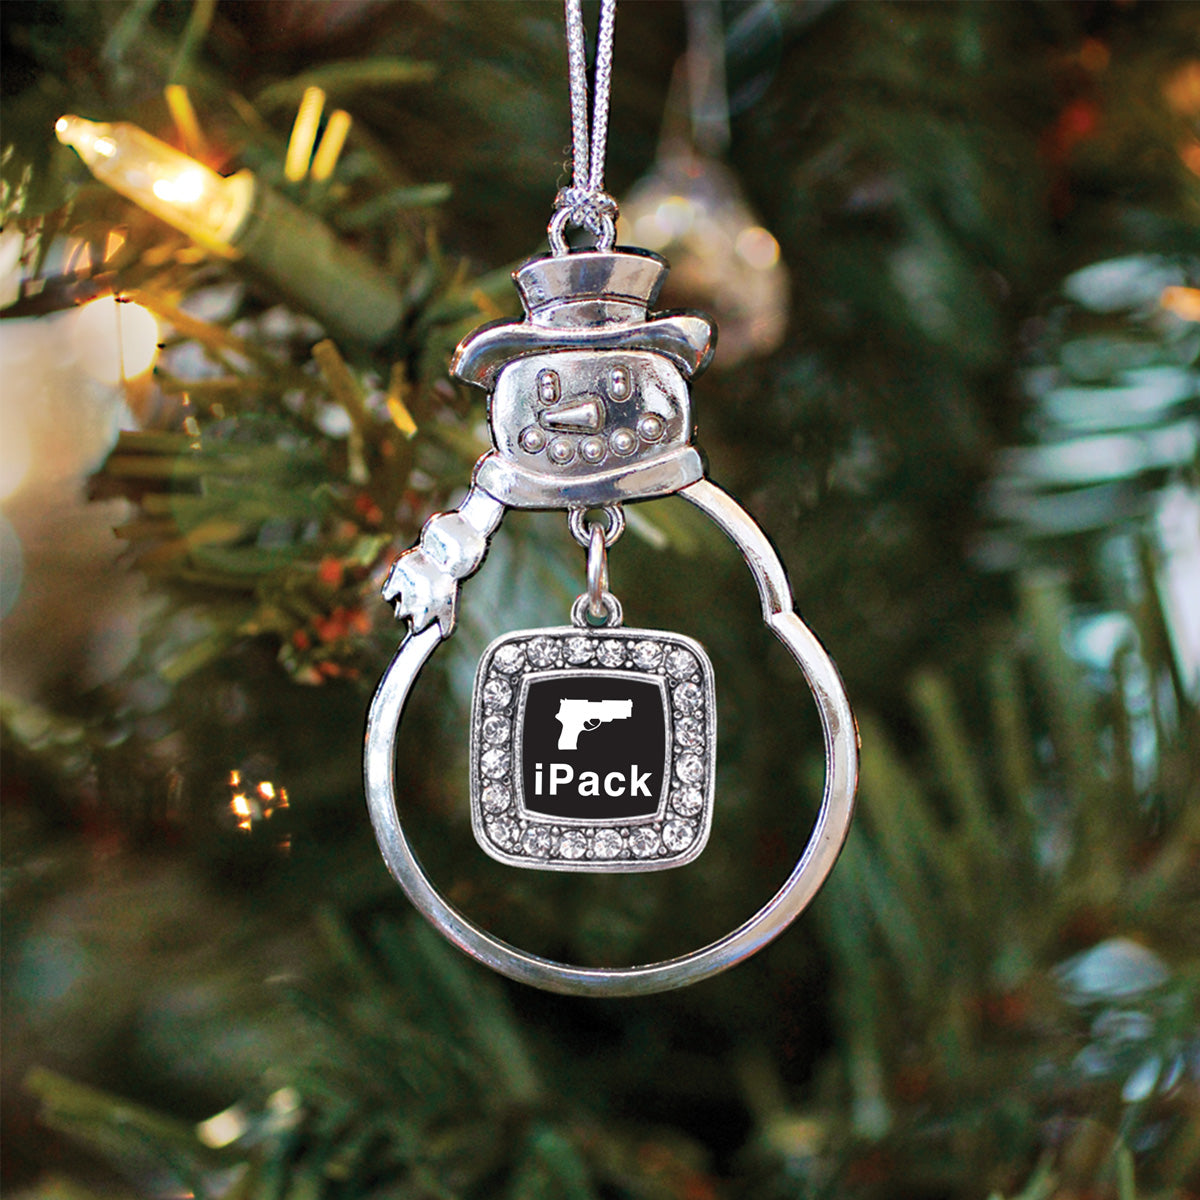 iPack Square Charm Christmas / Holiday Ornament